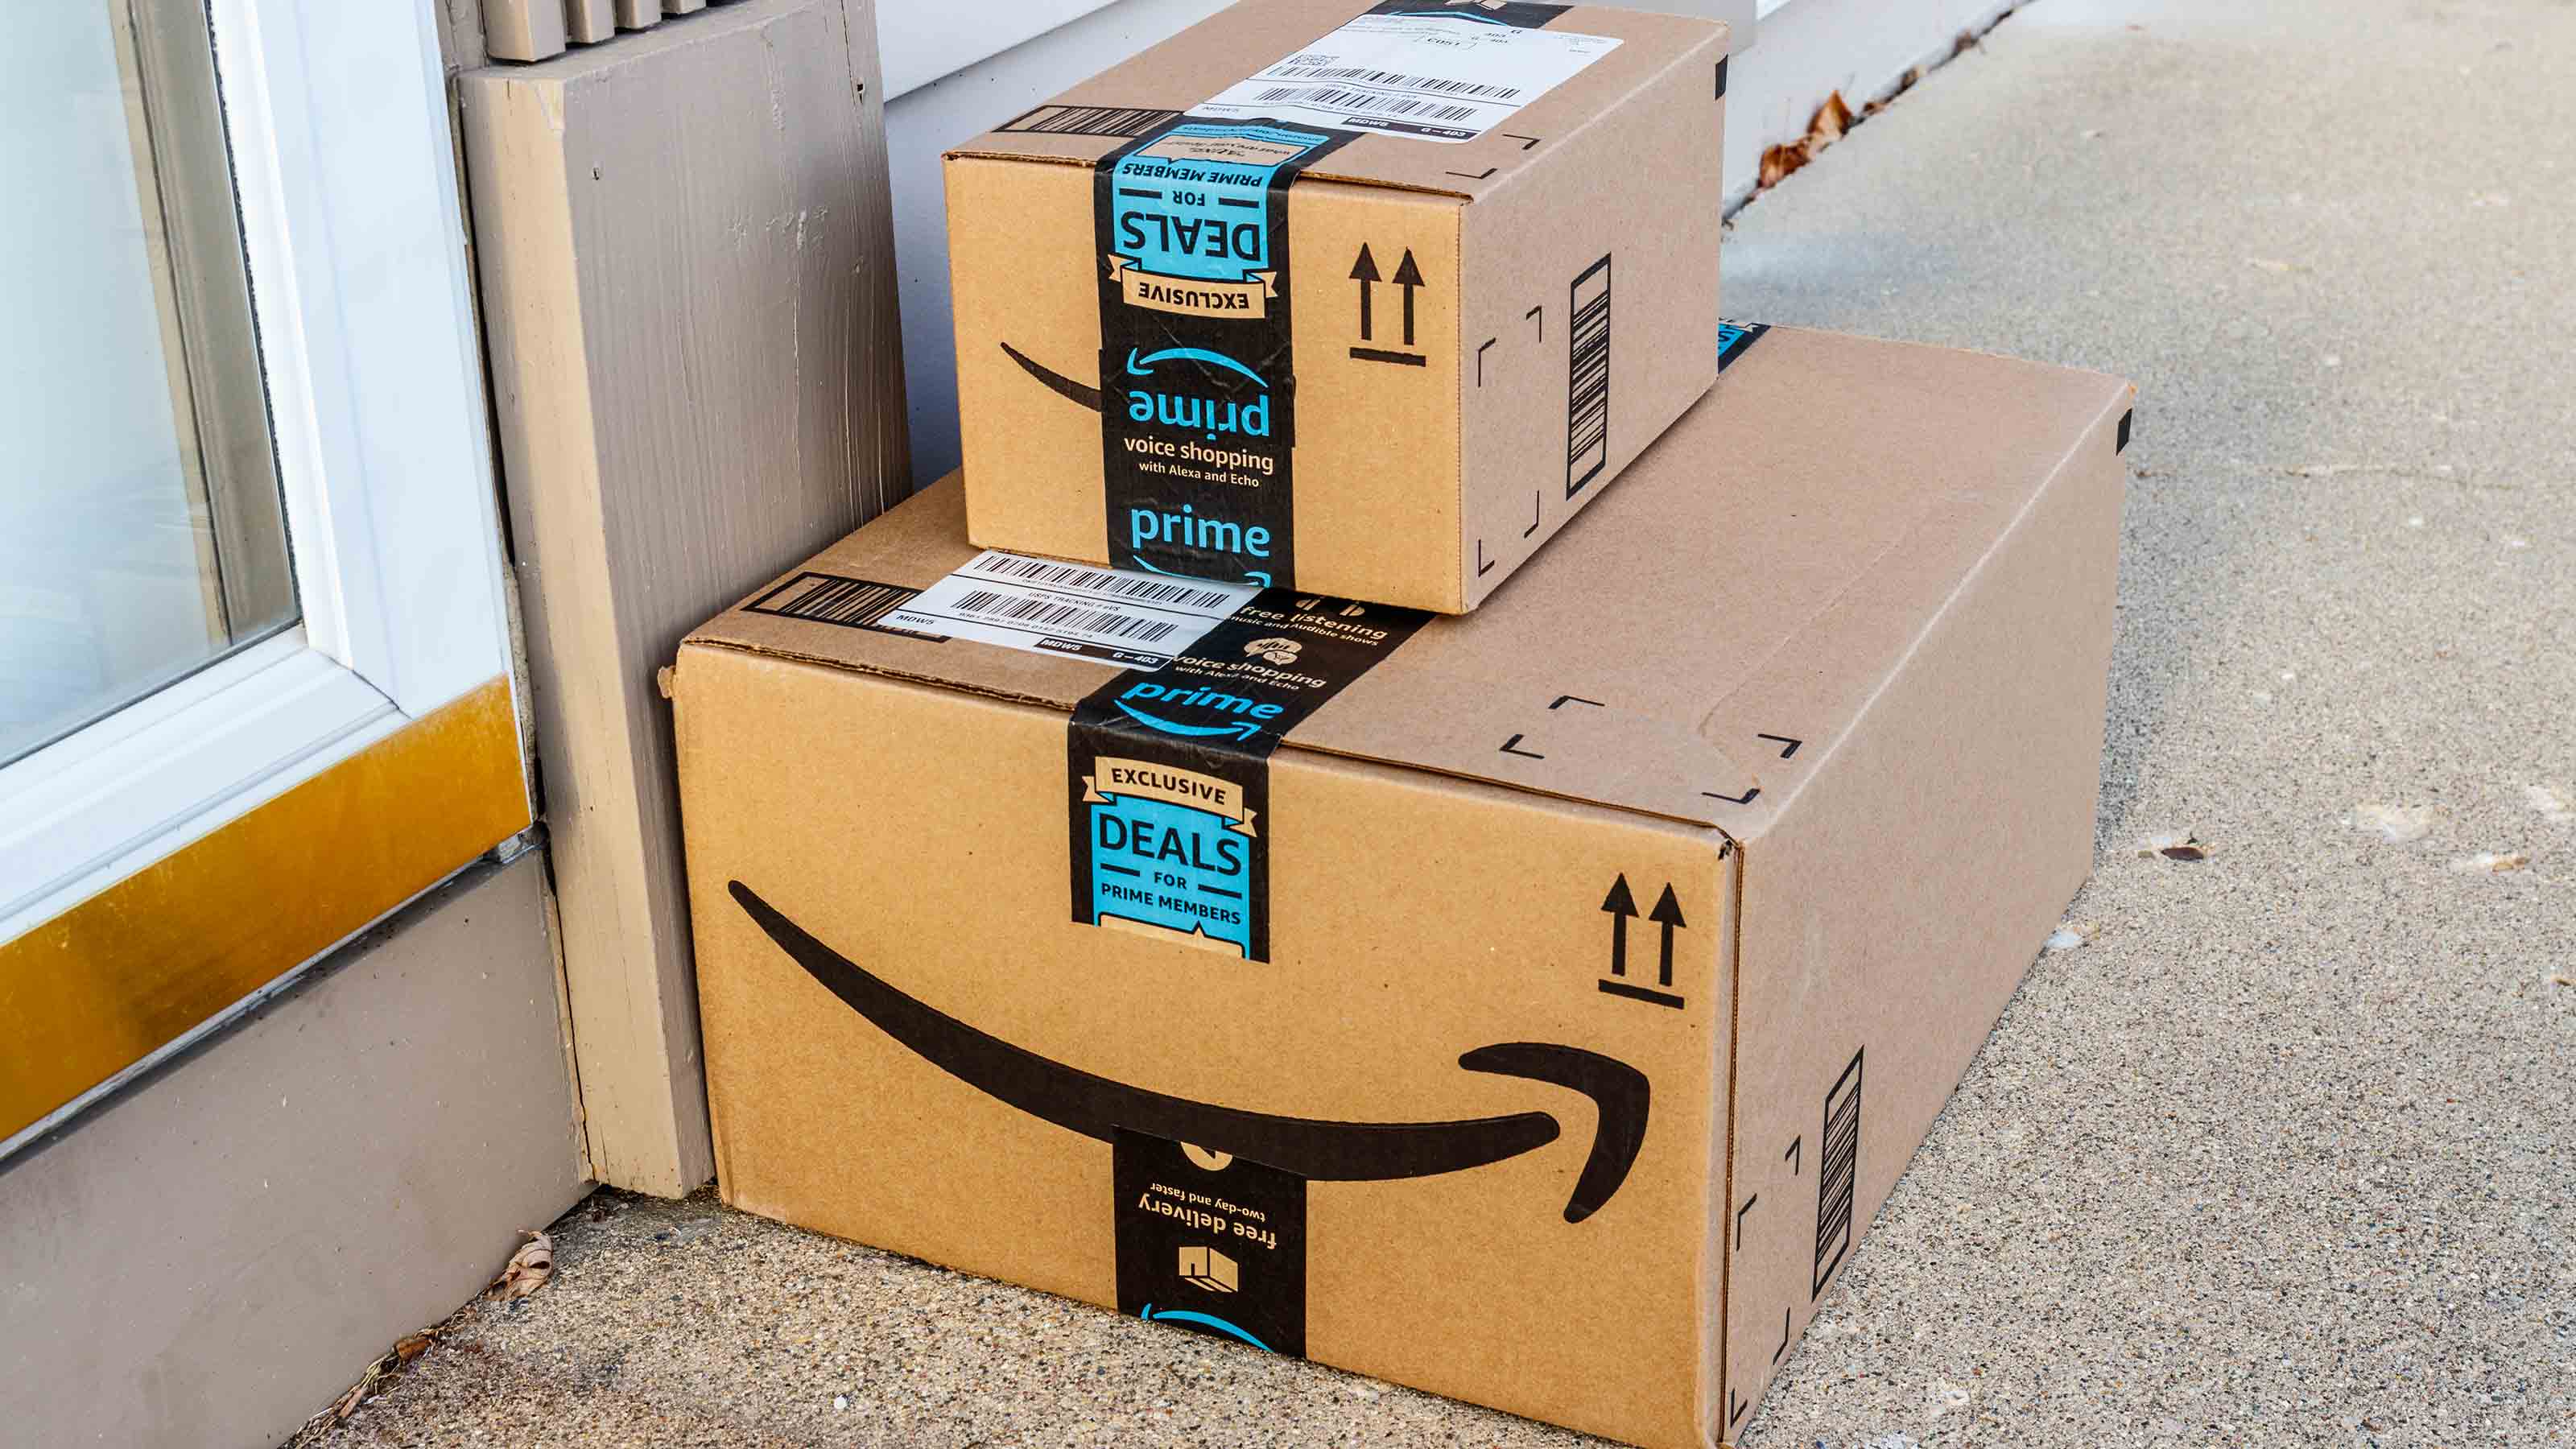 Here's how to see if the Prime Day, Deal Days prices are good